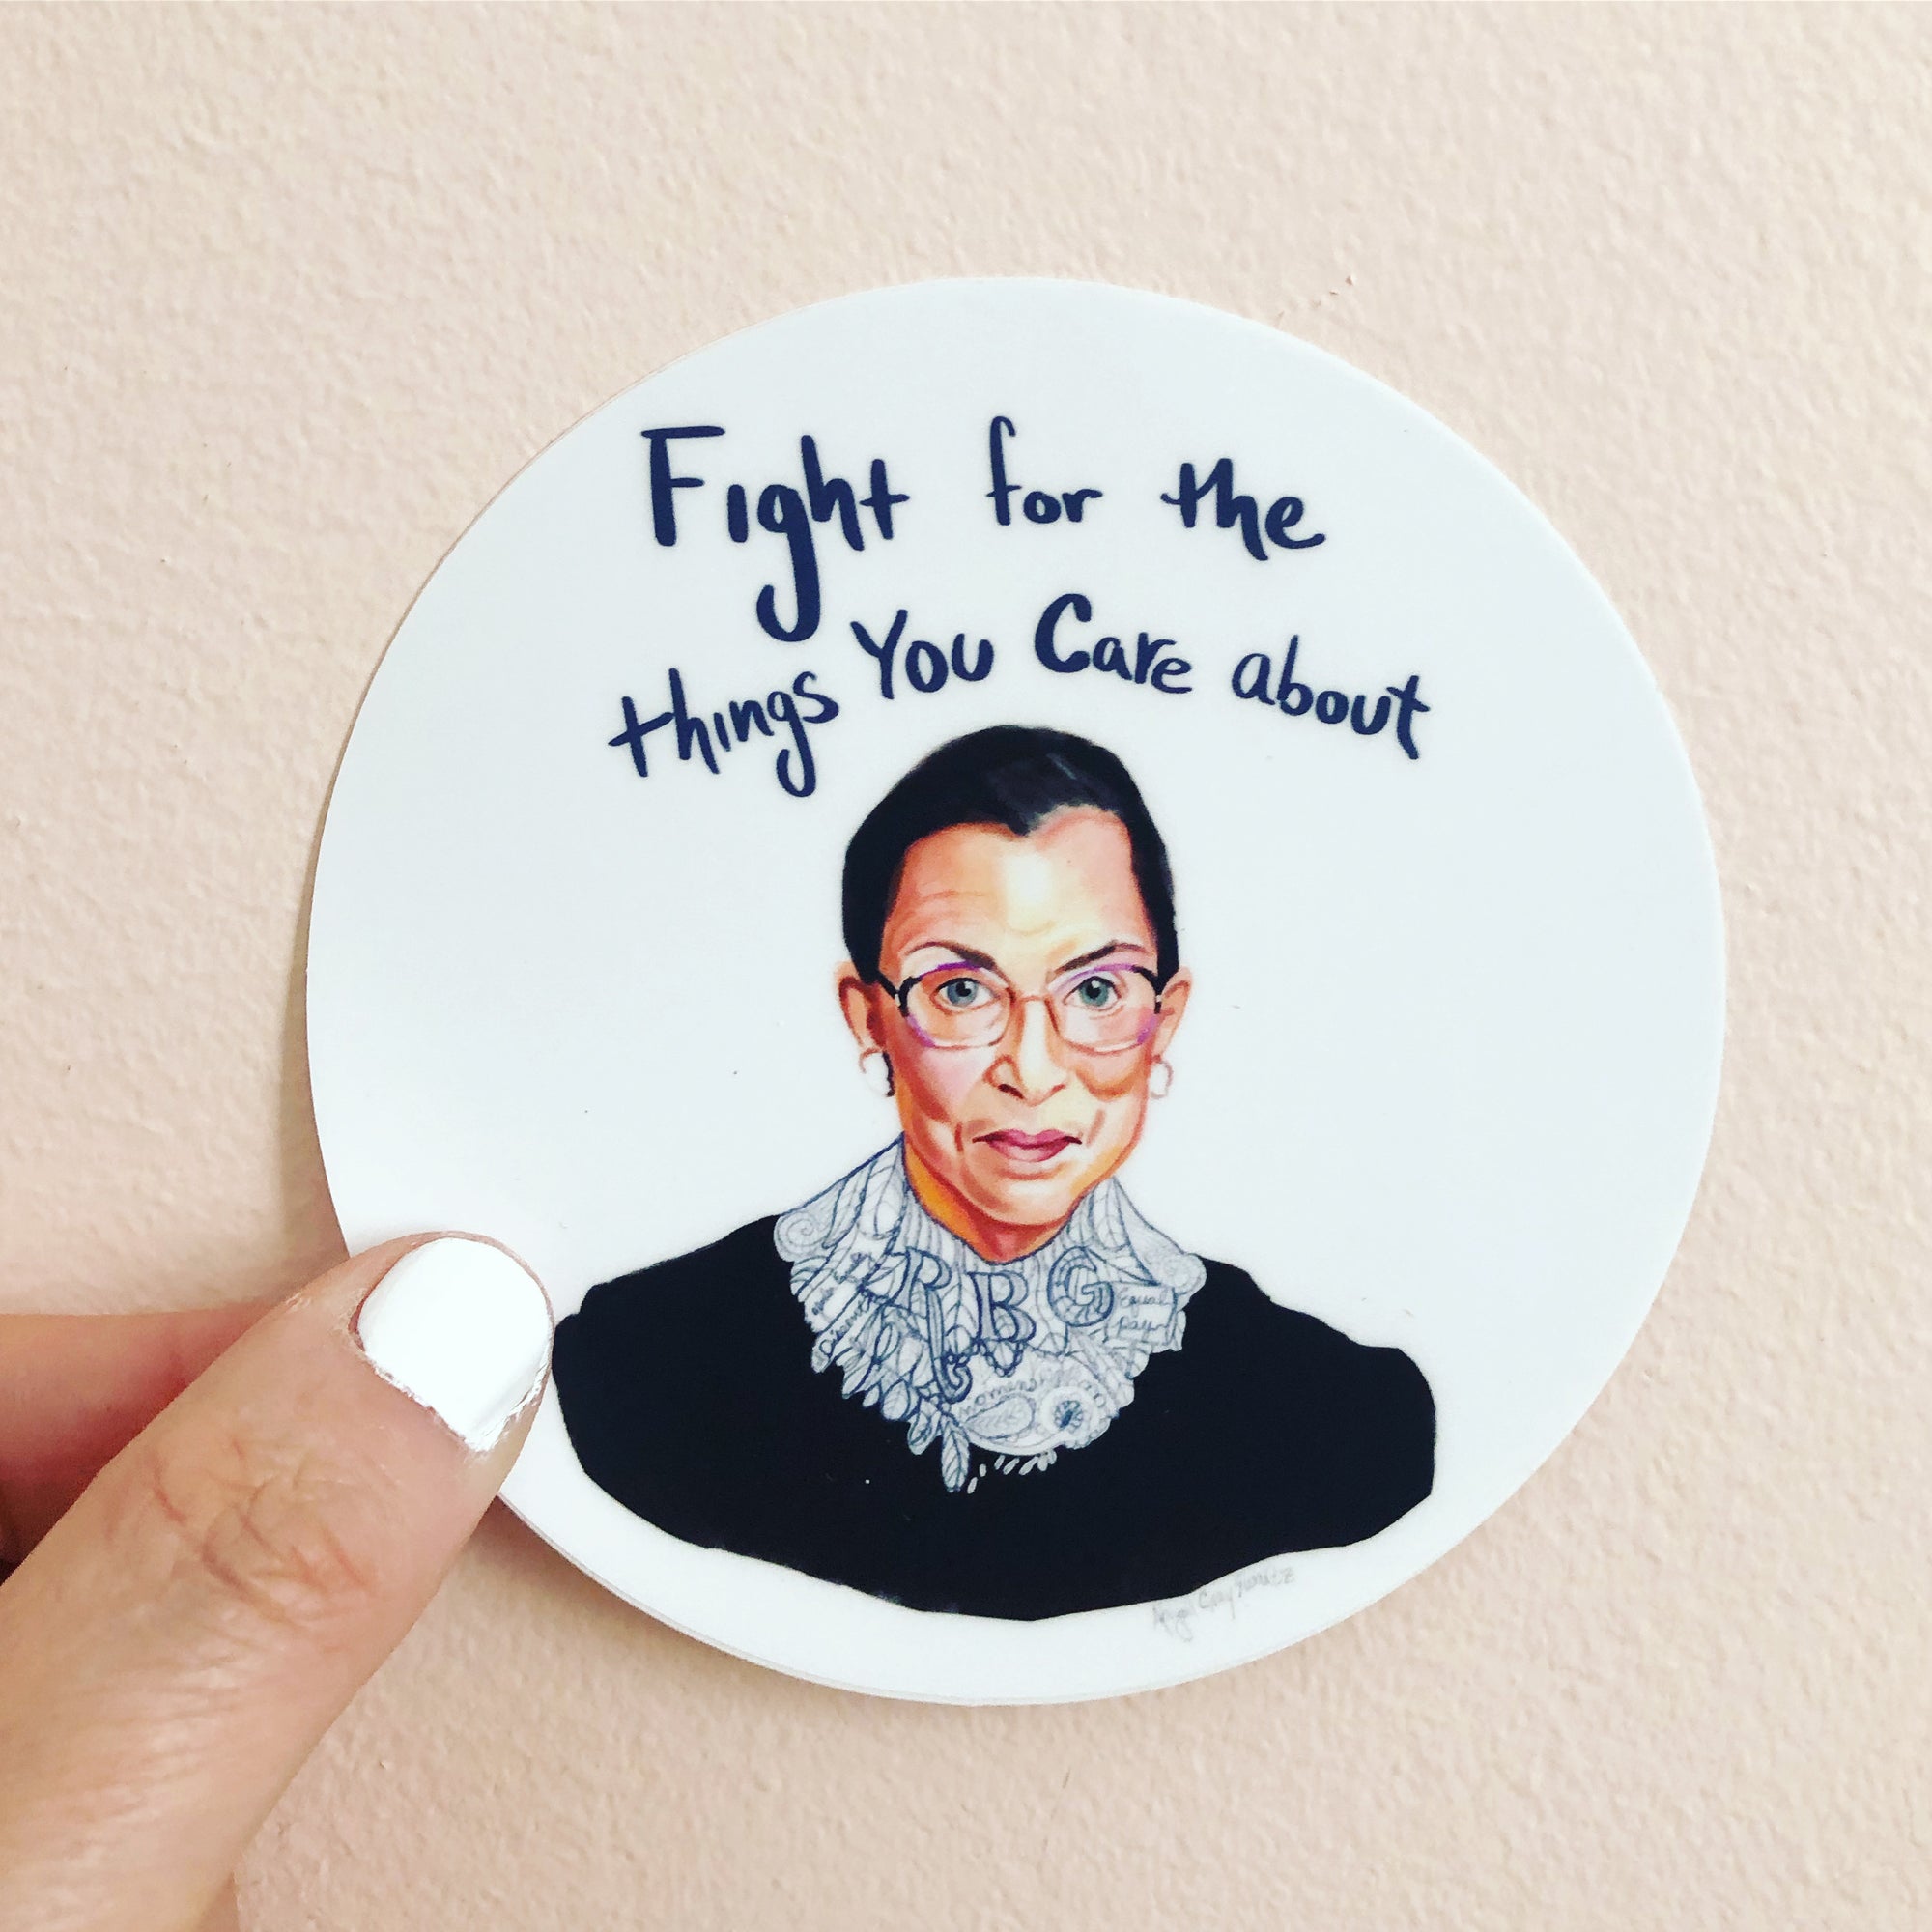 RBG portrait and quote sticker, "Fight for the things you care about" by Abigail Gray Swartz